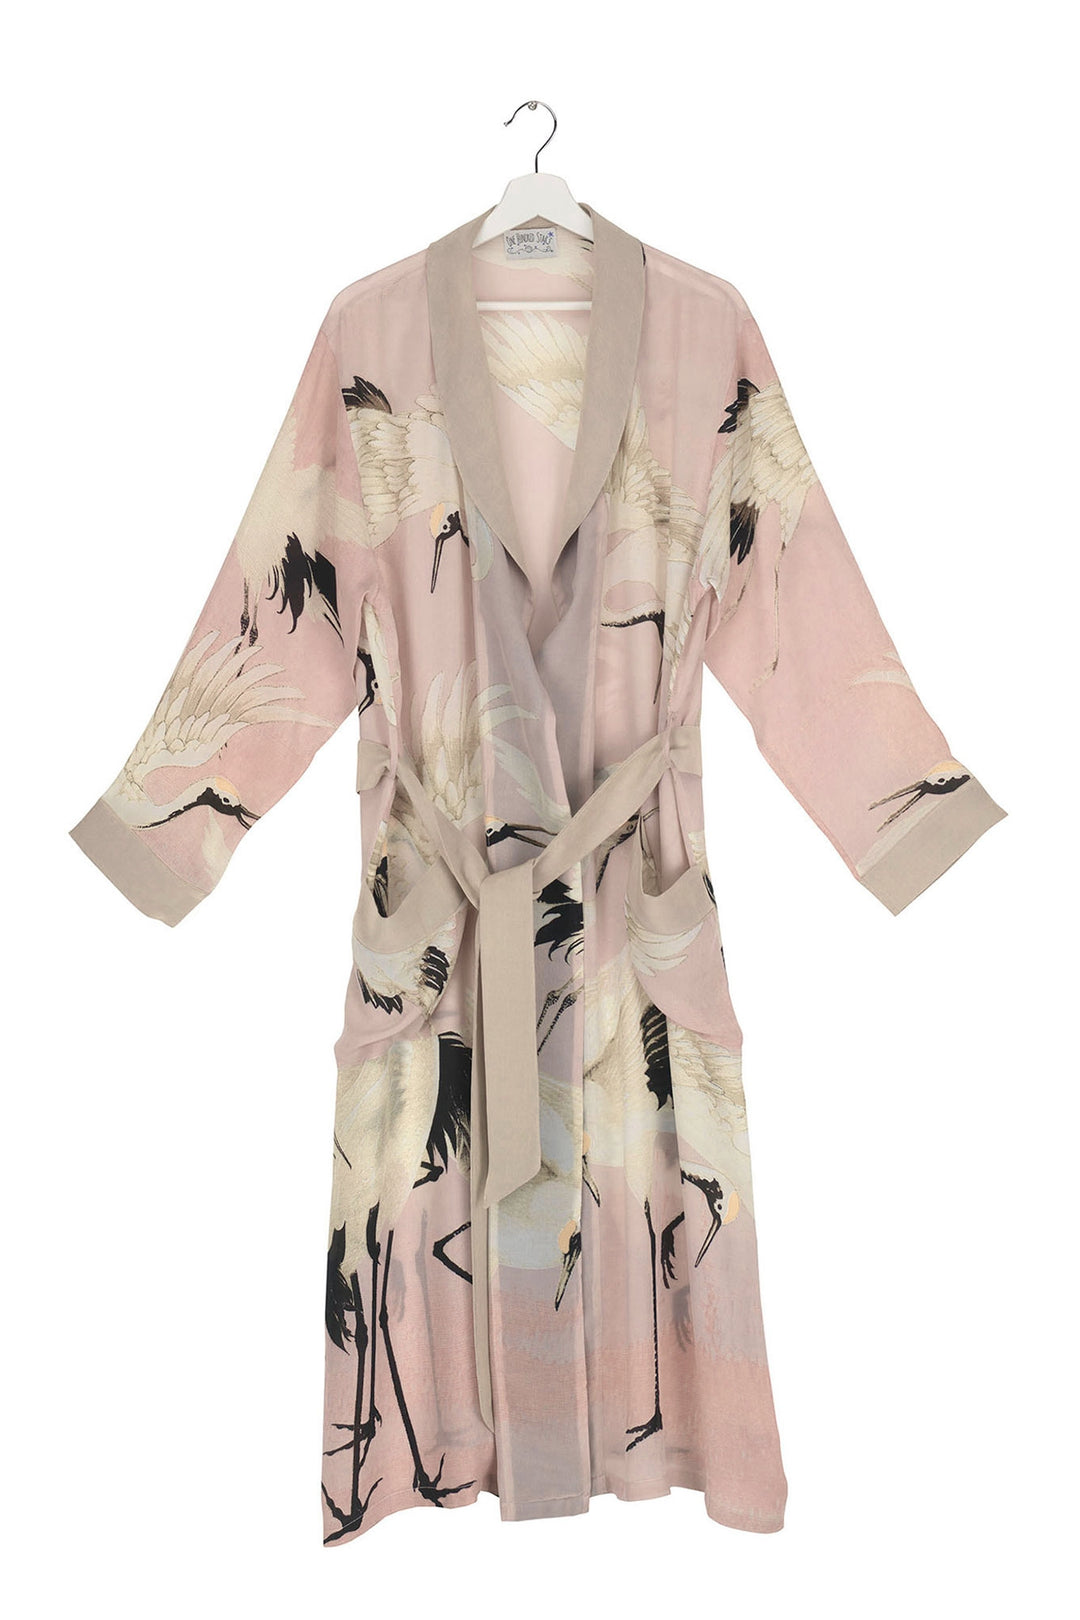 Womens dressing gown in pink stork print by one hundred stars